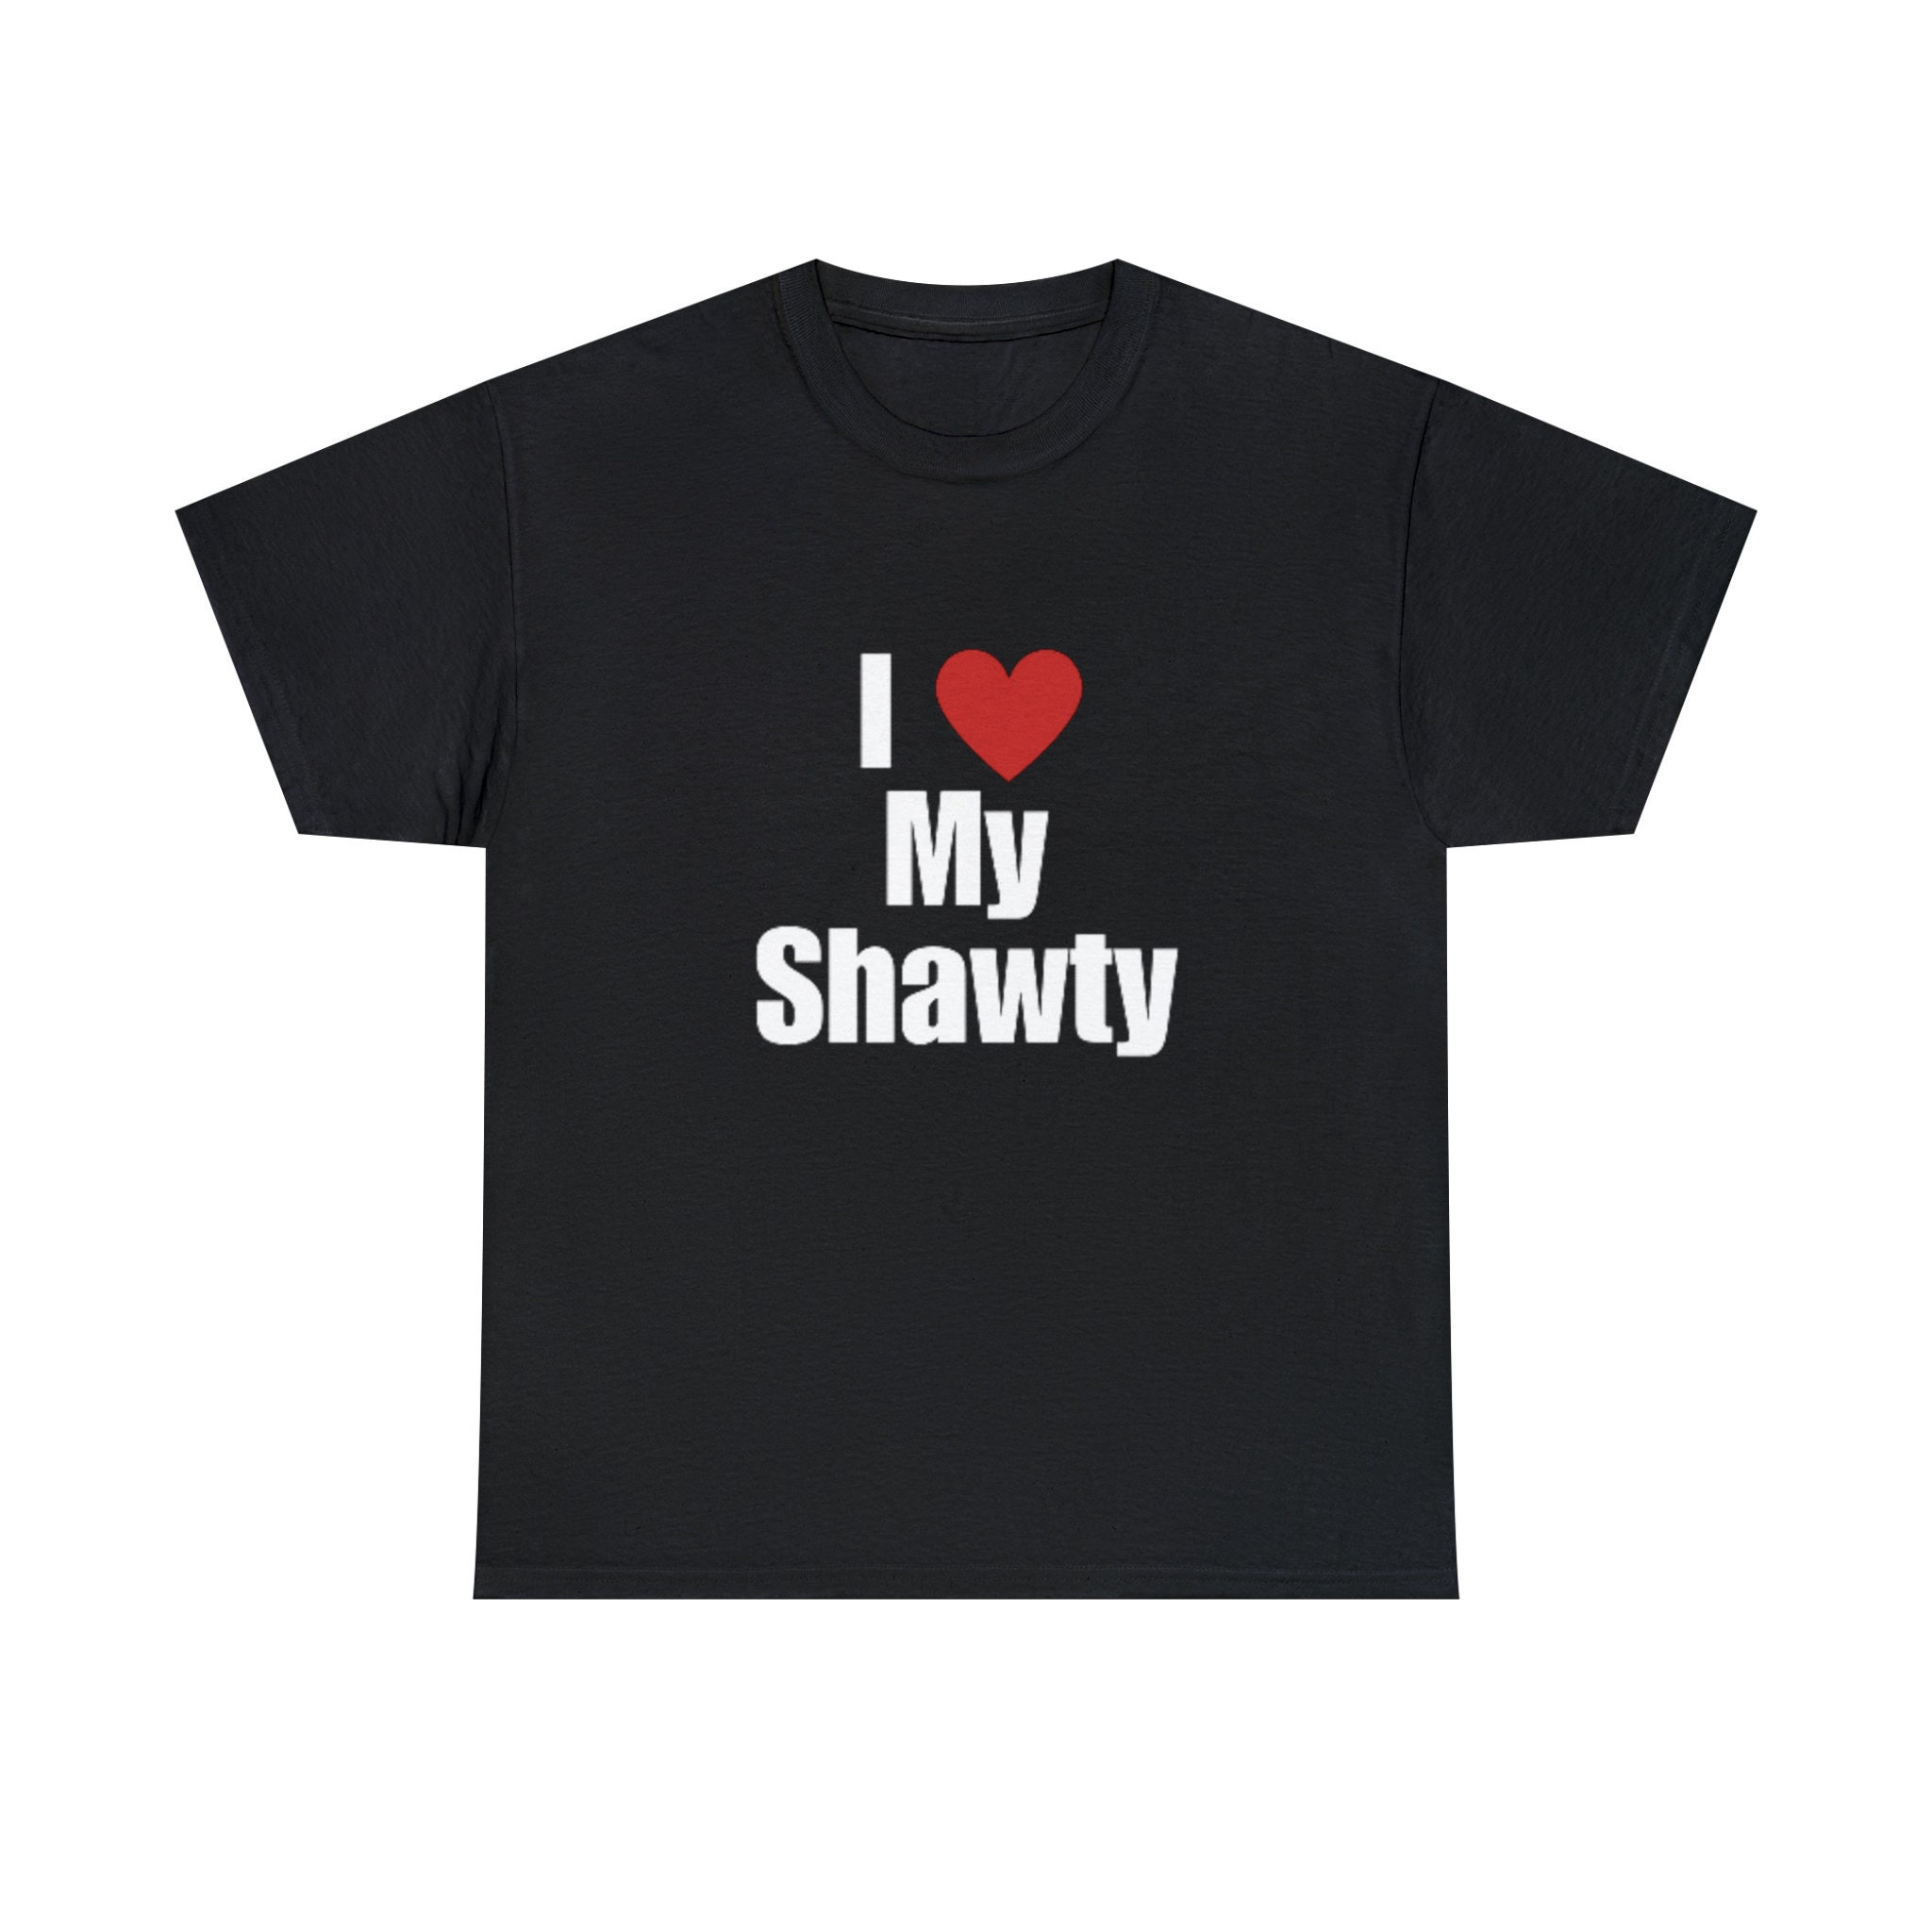 shawty's like a melody in my head graphics text meme Essential T